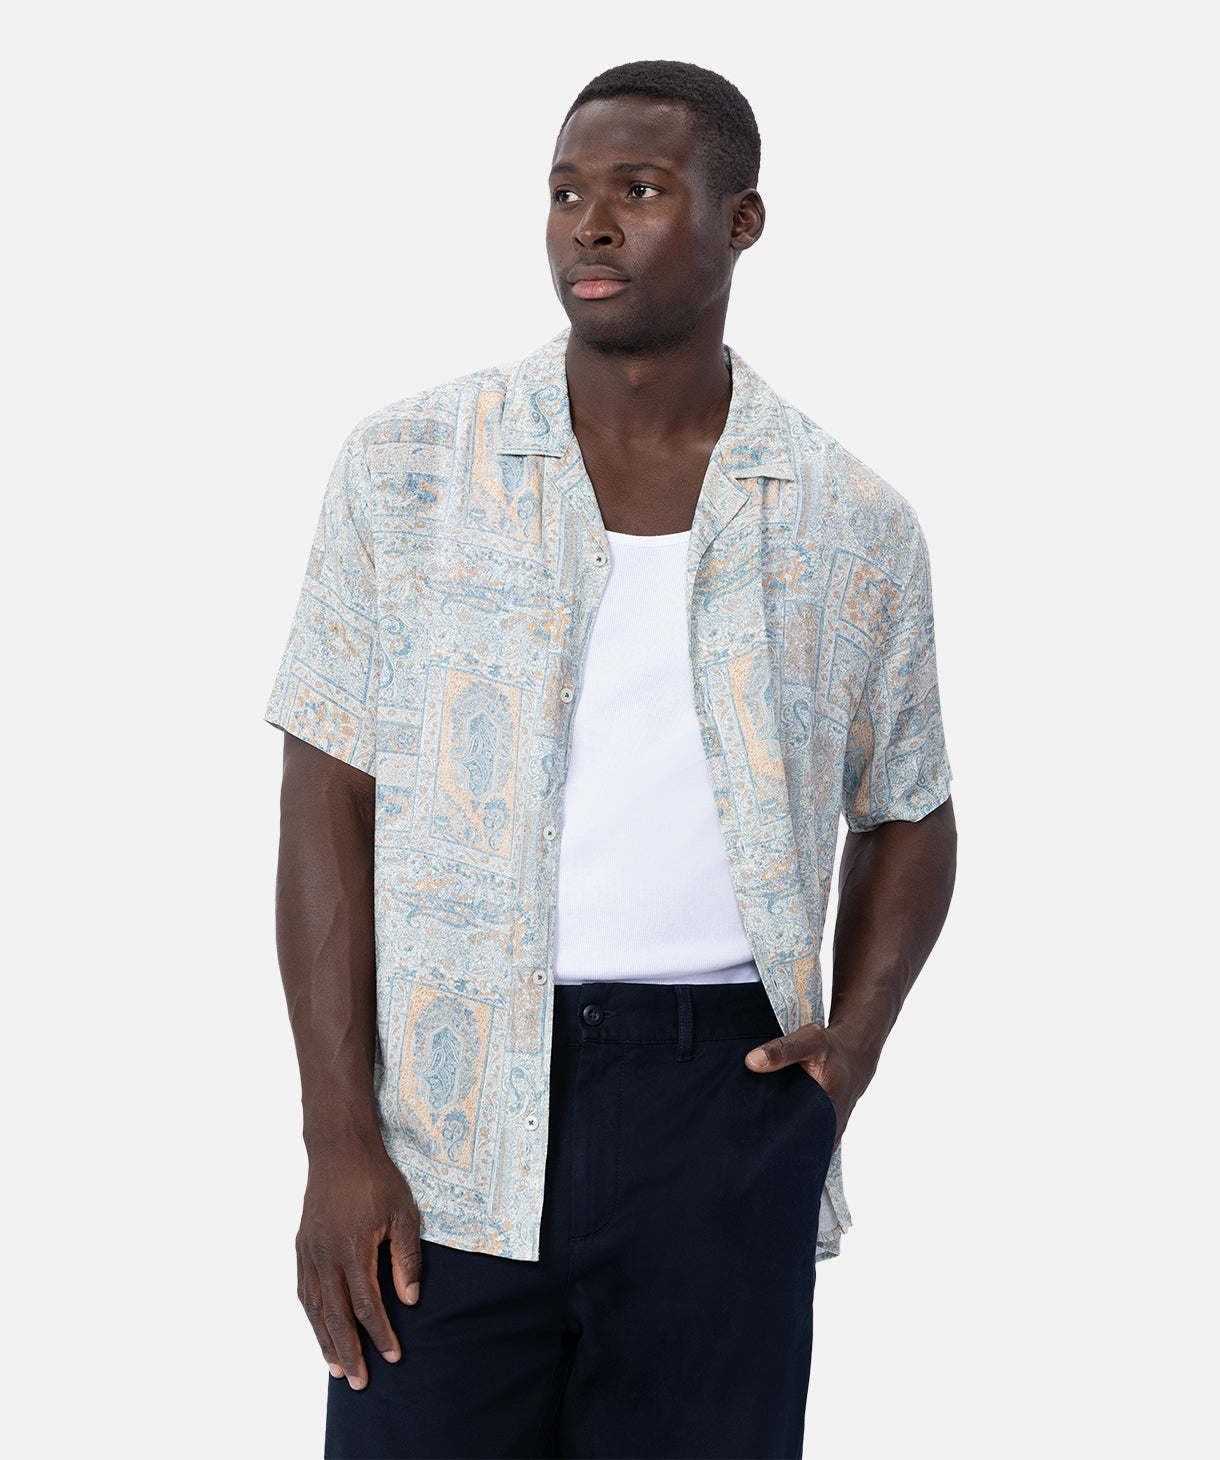 The Ryder S/s Shirt - Multi – Industrie Clothing Pty Ltd